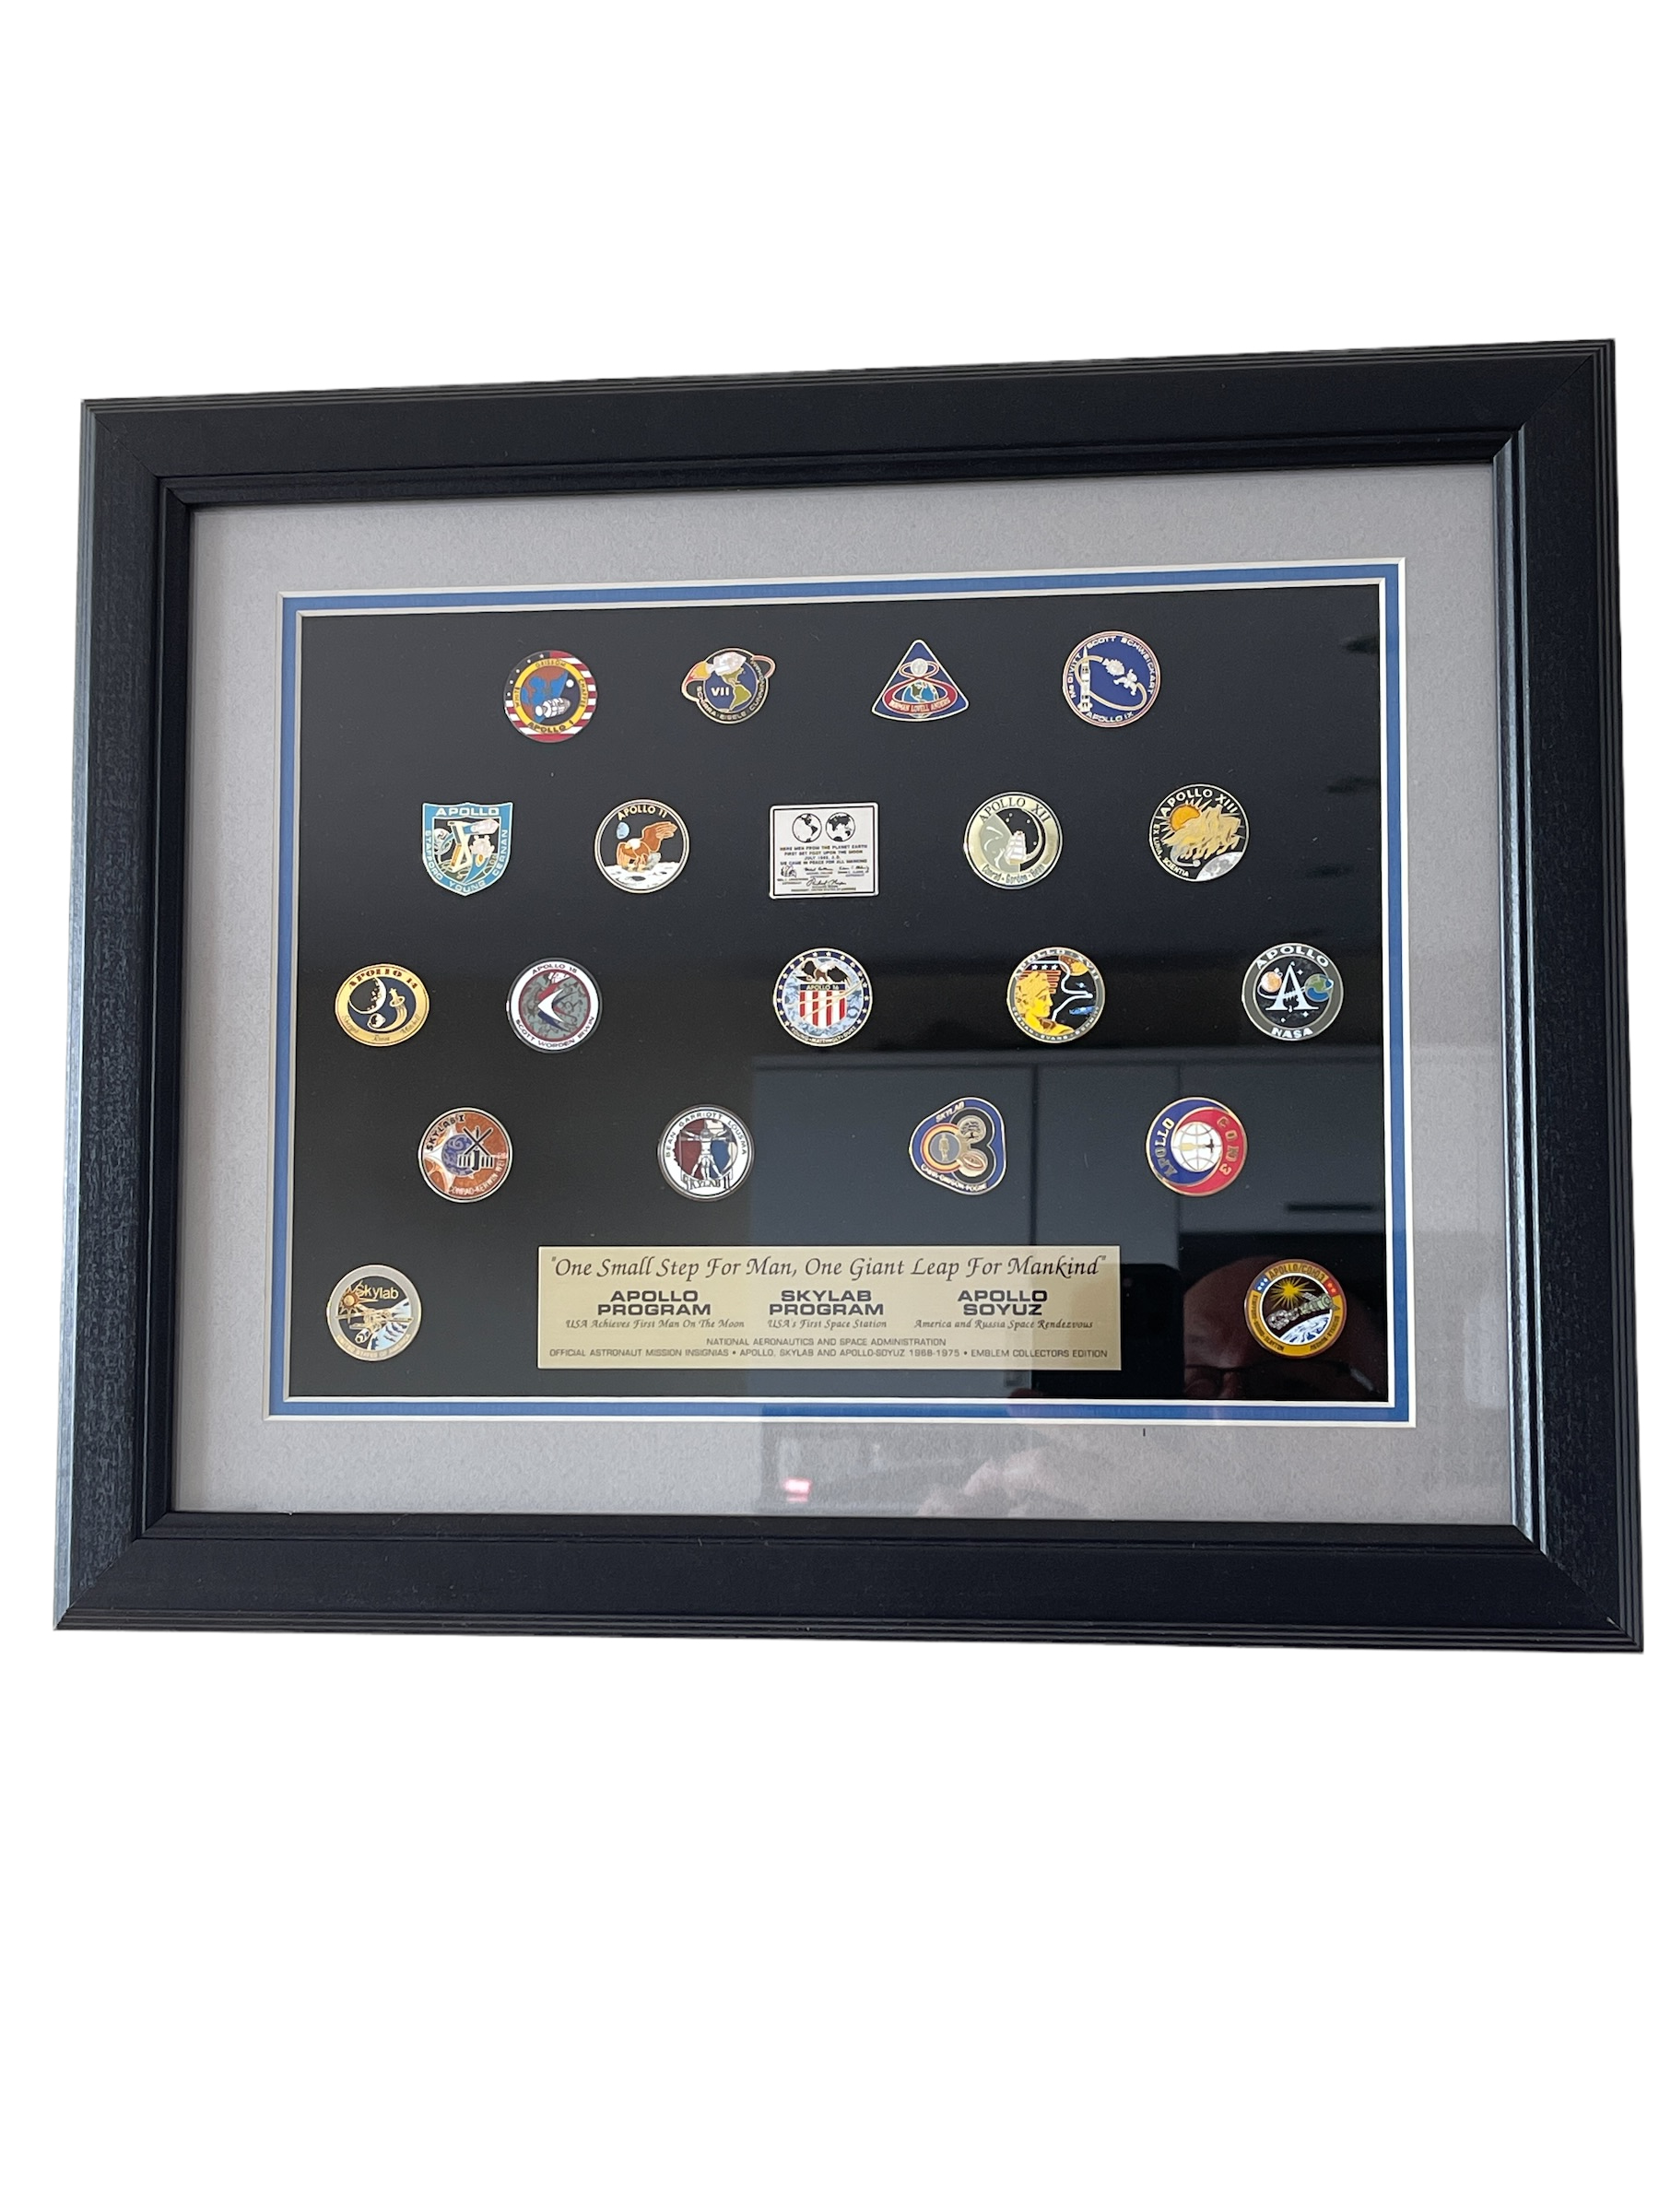 Framed Collection of NASA Pins - "One Small Step for Man, One Giant Leap for Mankind"